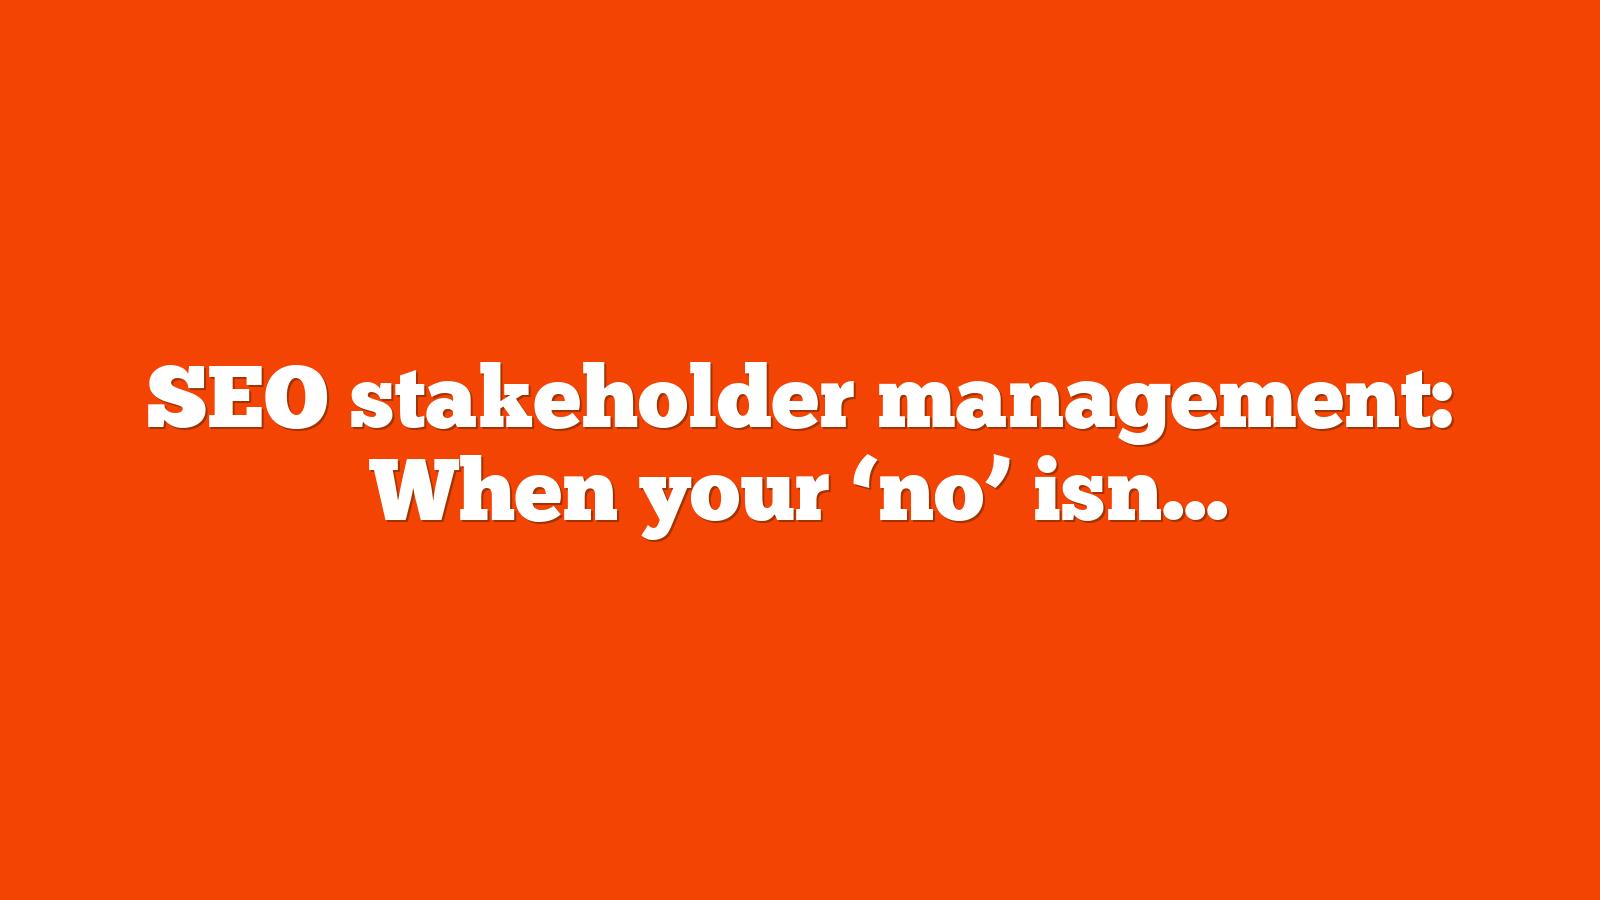 SEO stakeholder management: When your ‘no’ isn’t enough